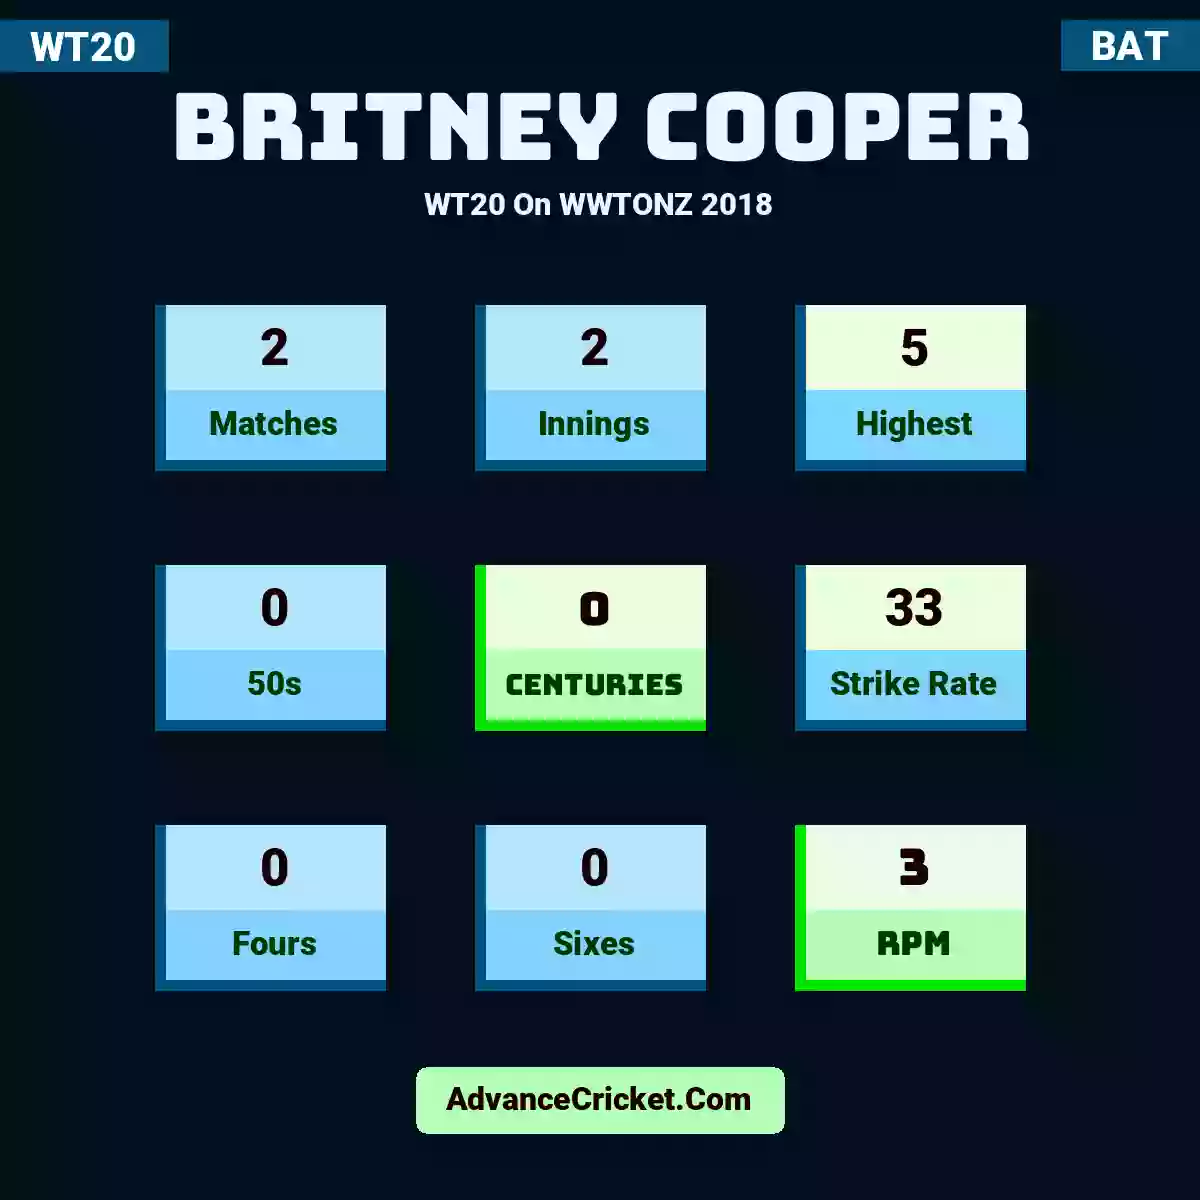 Britney Cooper WT20  On WWTONZ 2018, Britney Cooper played 2 matches, scored 5 runs as highest, 0 half-centuries, and 0 centuries, with a strike rate of 33. B.Cooper hit 0 fours and 0 sixes, with an RPM of 3.